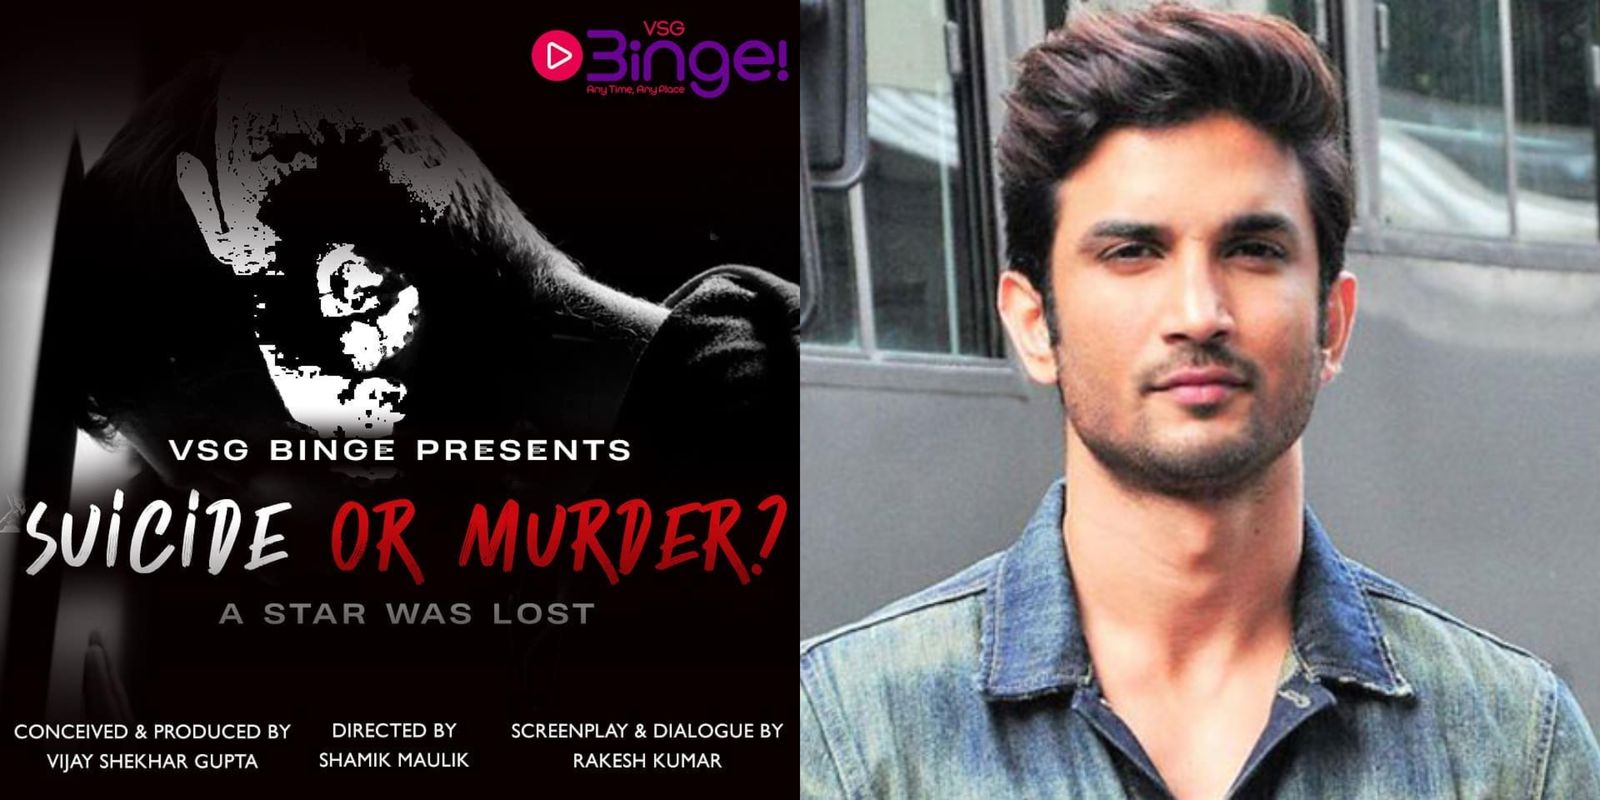 ‘Suicide Or Murder?’: Motion Poster Of Film Based On Sushant Singh Rajput’s Life Released